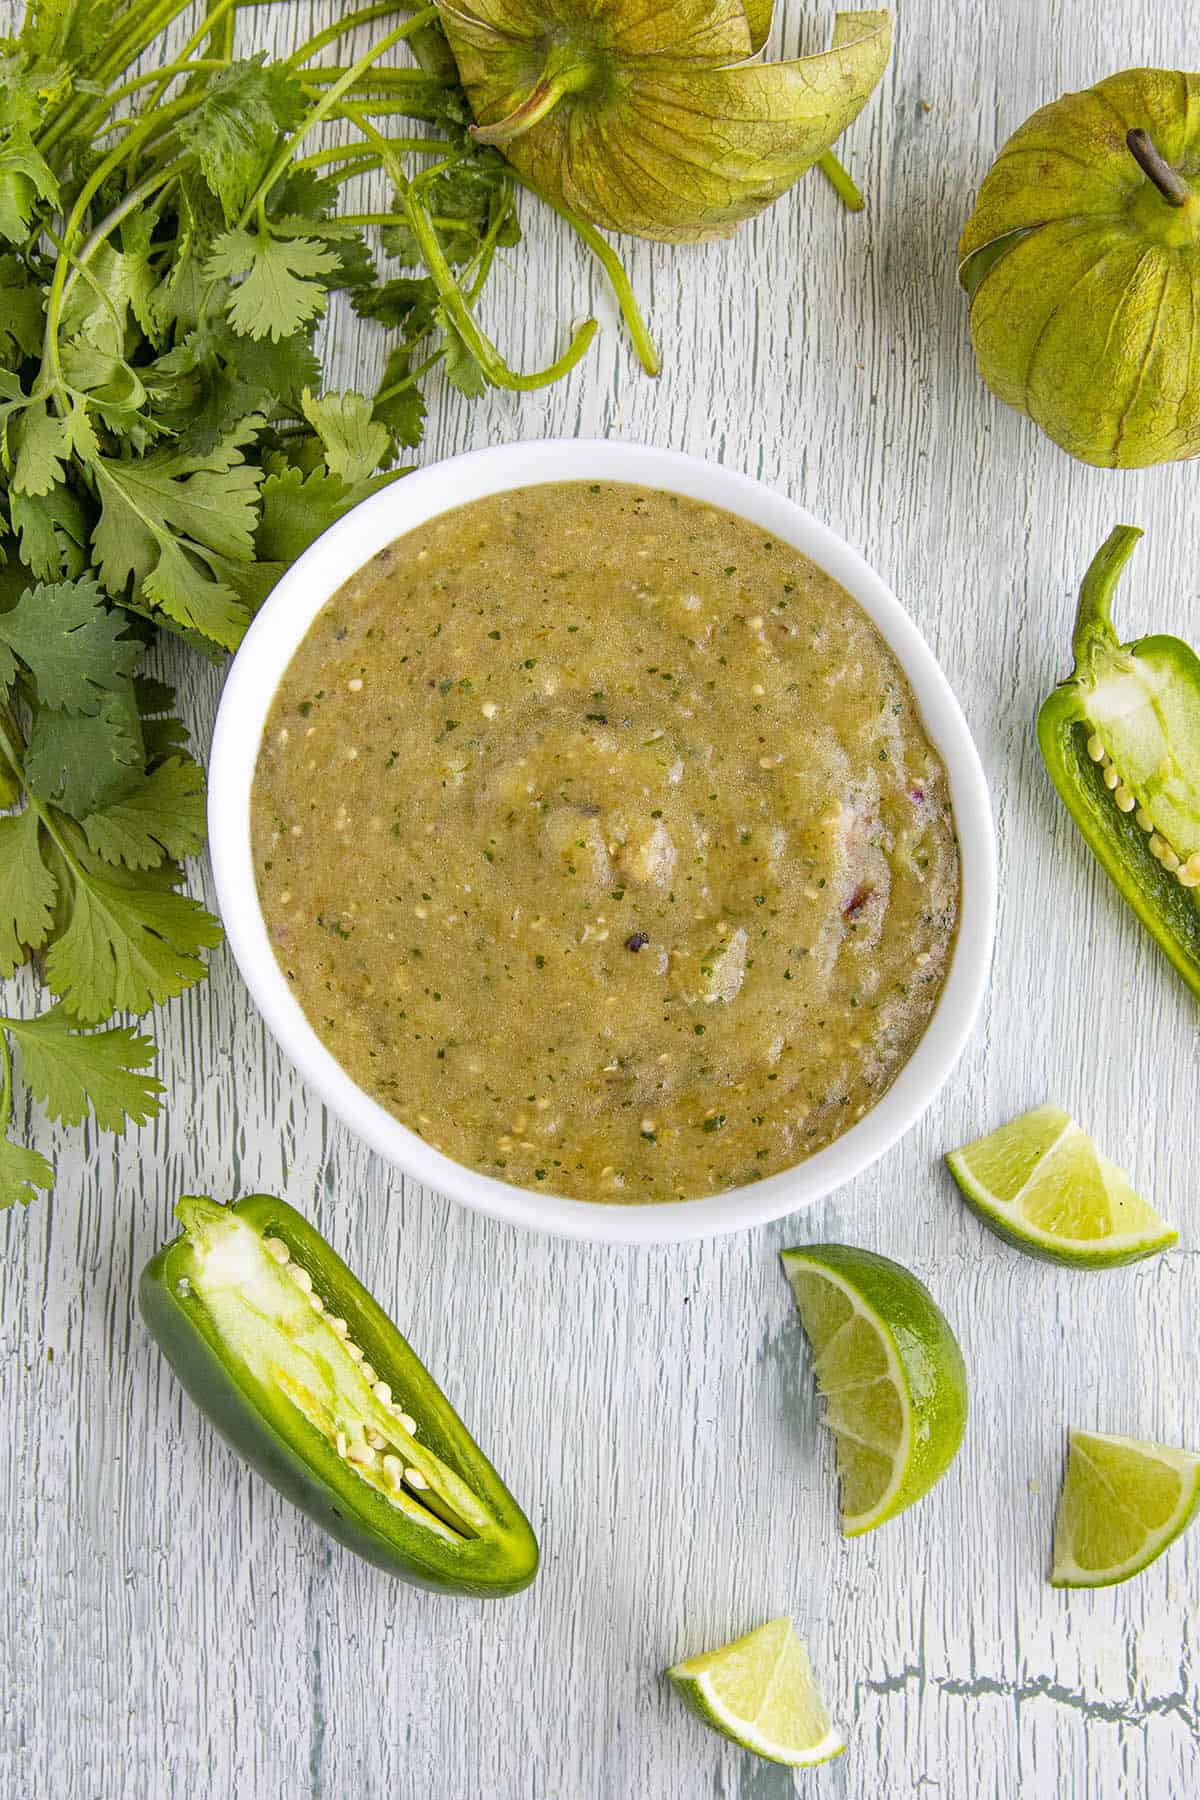 Tomatillo Sauce in a bowl, ready to serve